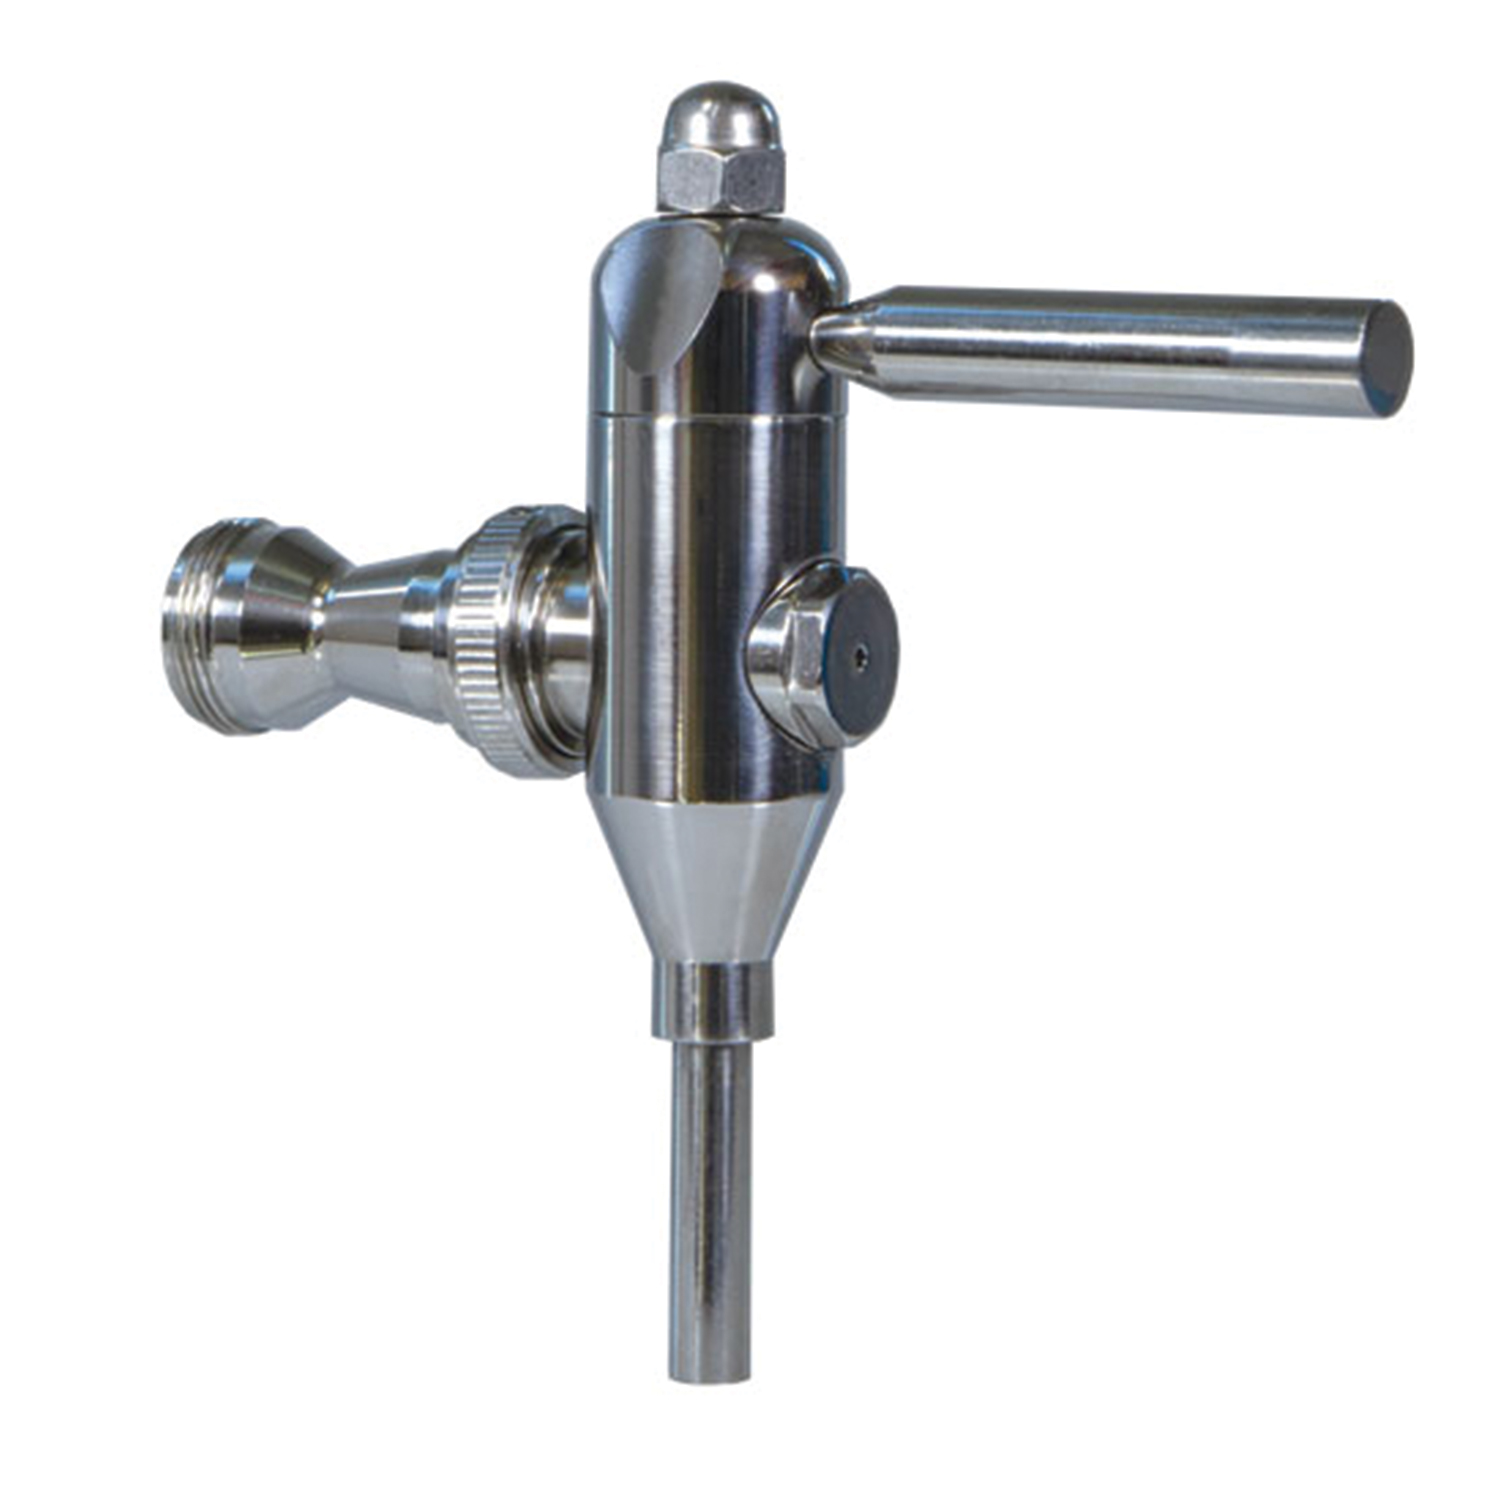 Swing Lever Faucet - Draft Beer Systems, Faucets - BBSPro